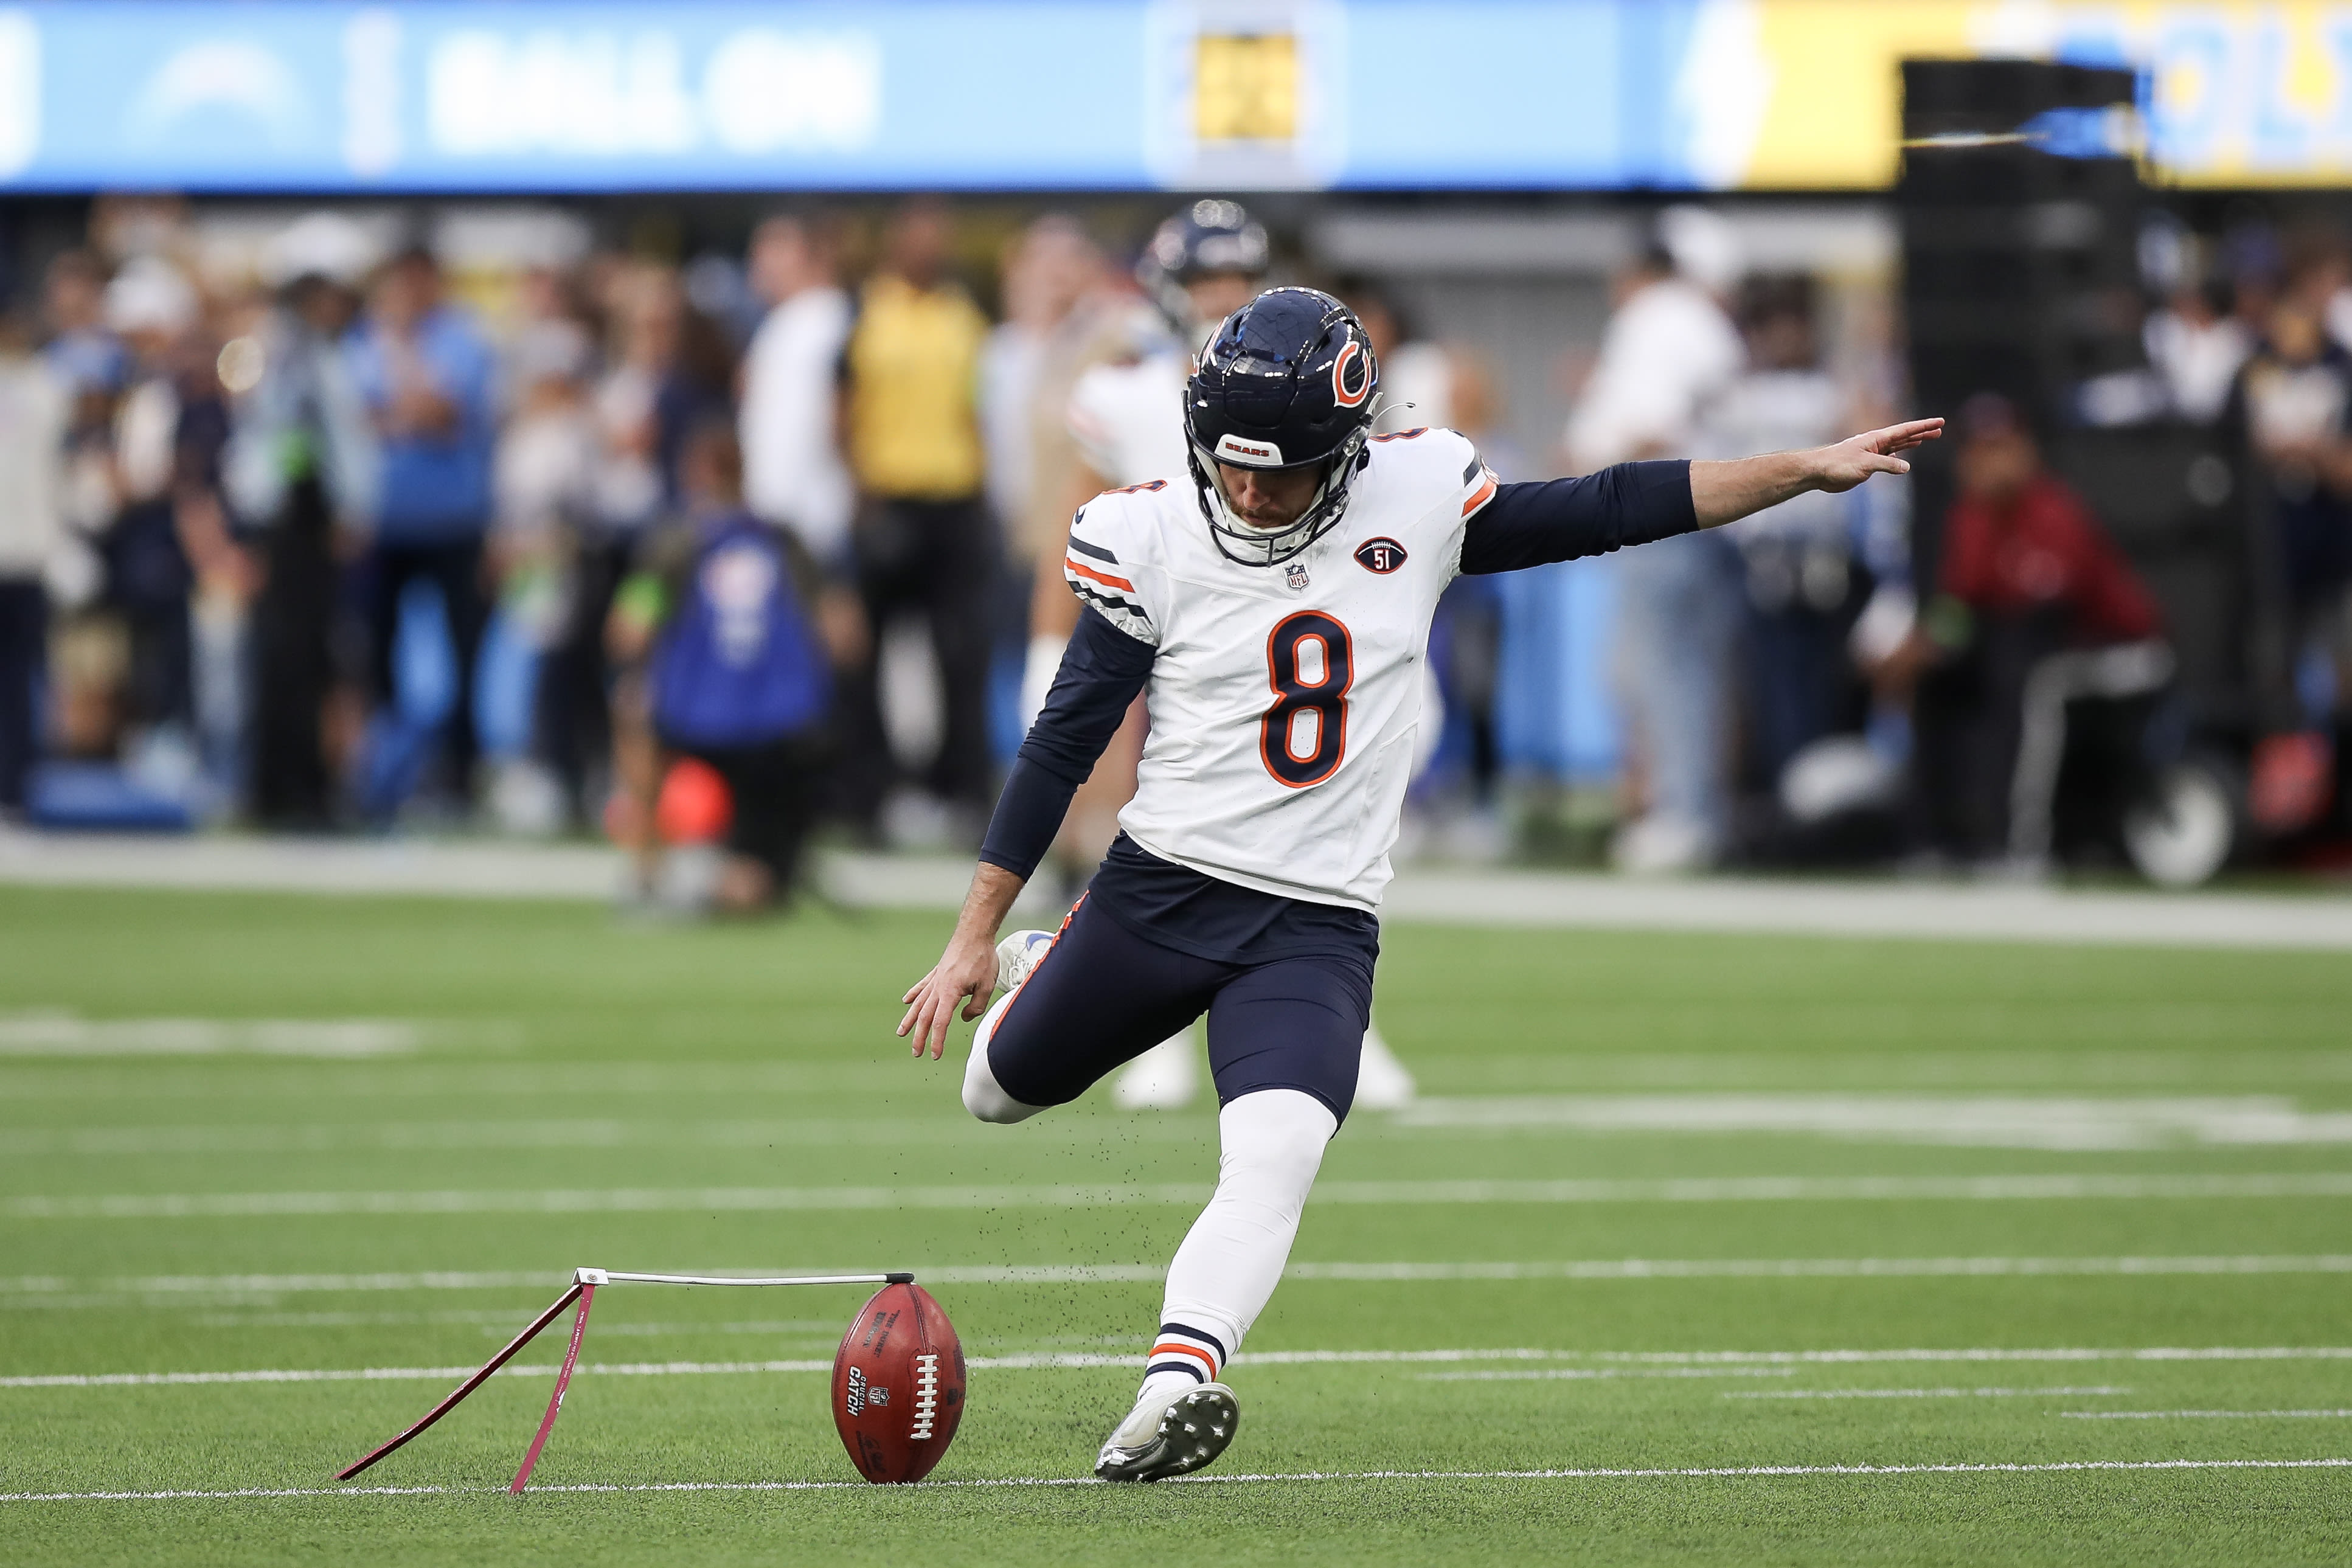 Bears open to joining unorthodox trend following NFL's new kickoff rules